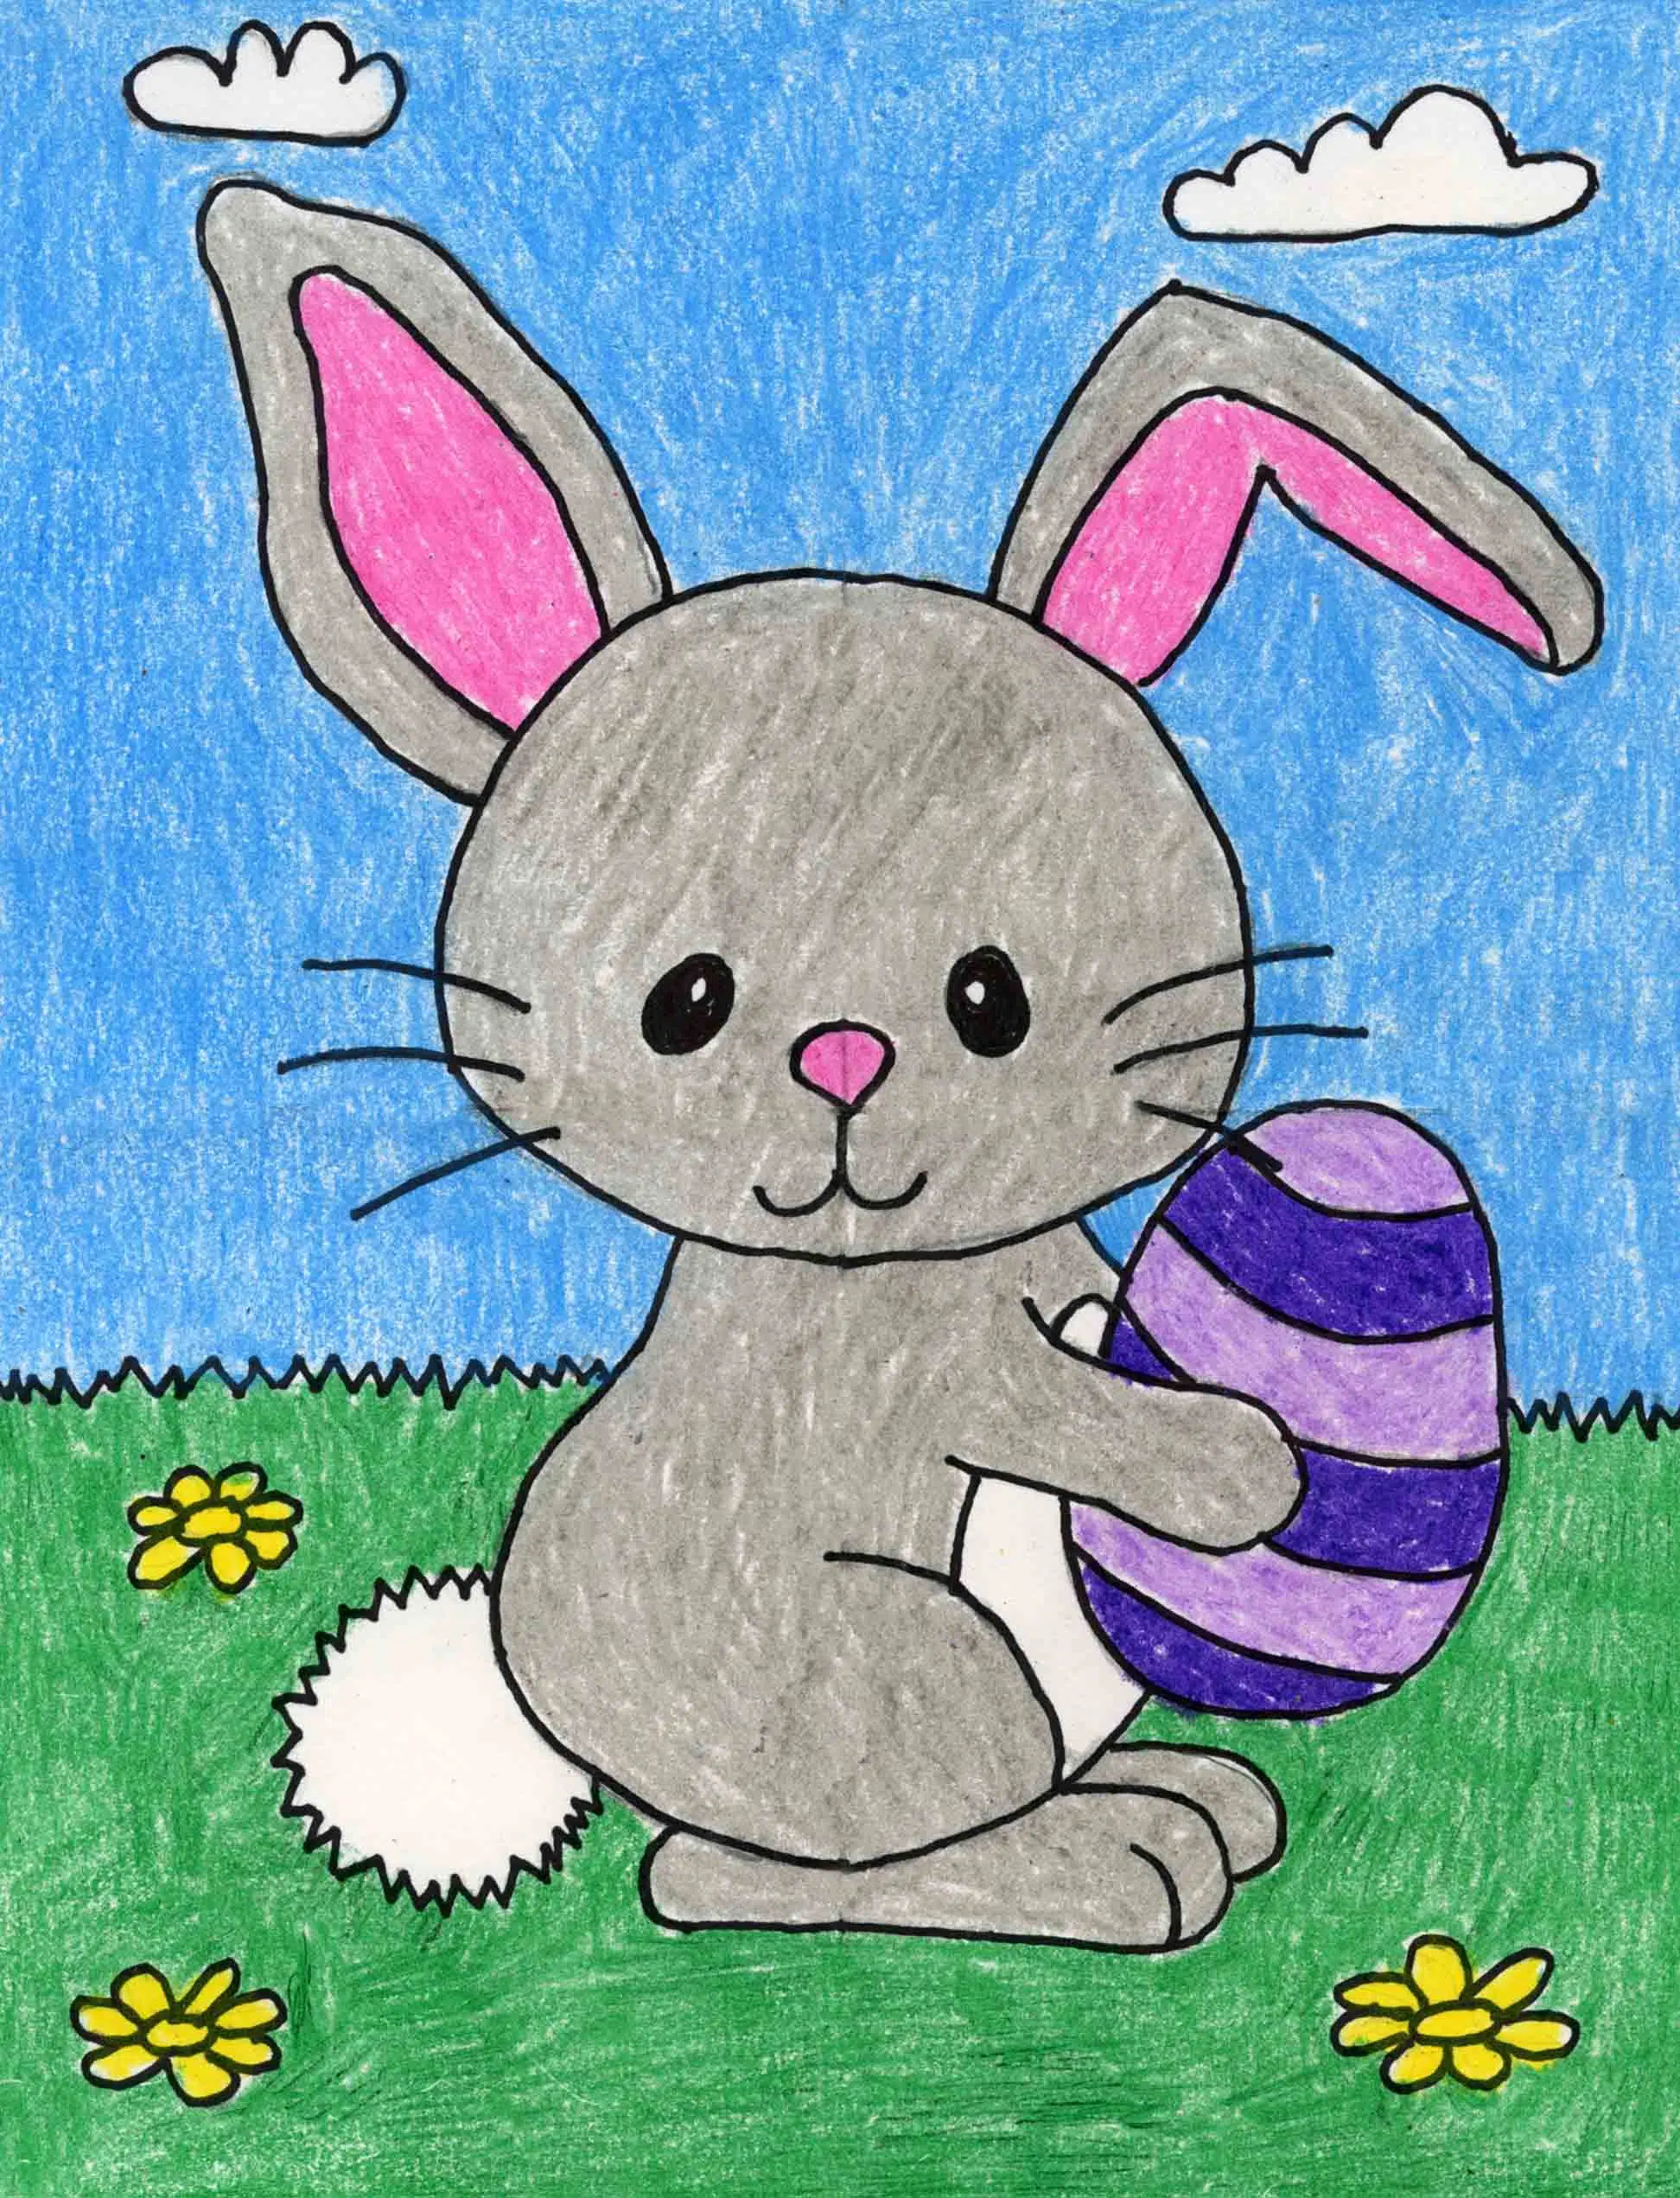 Easy How to Draw the Easter Bunny Tutorial Video and Easter Bunny Coloring Page